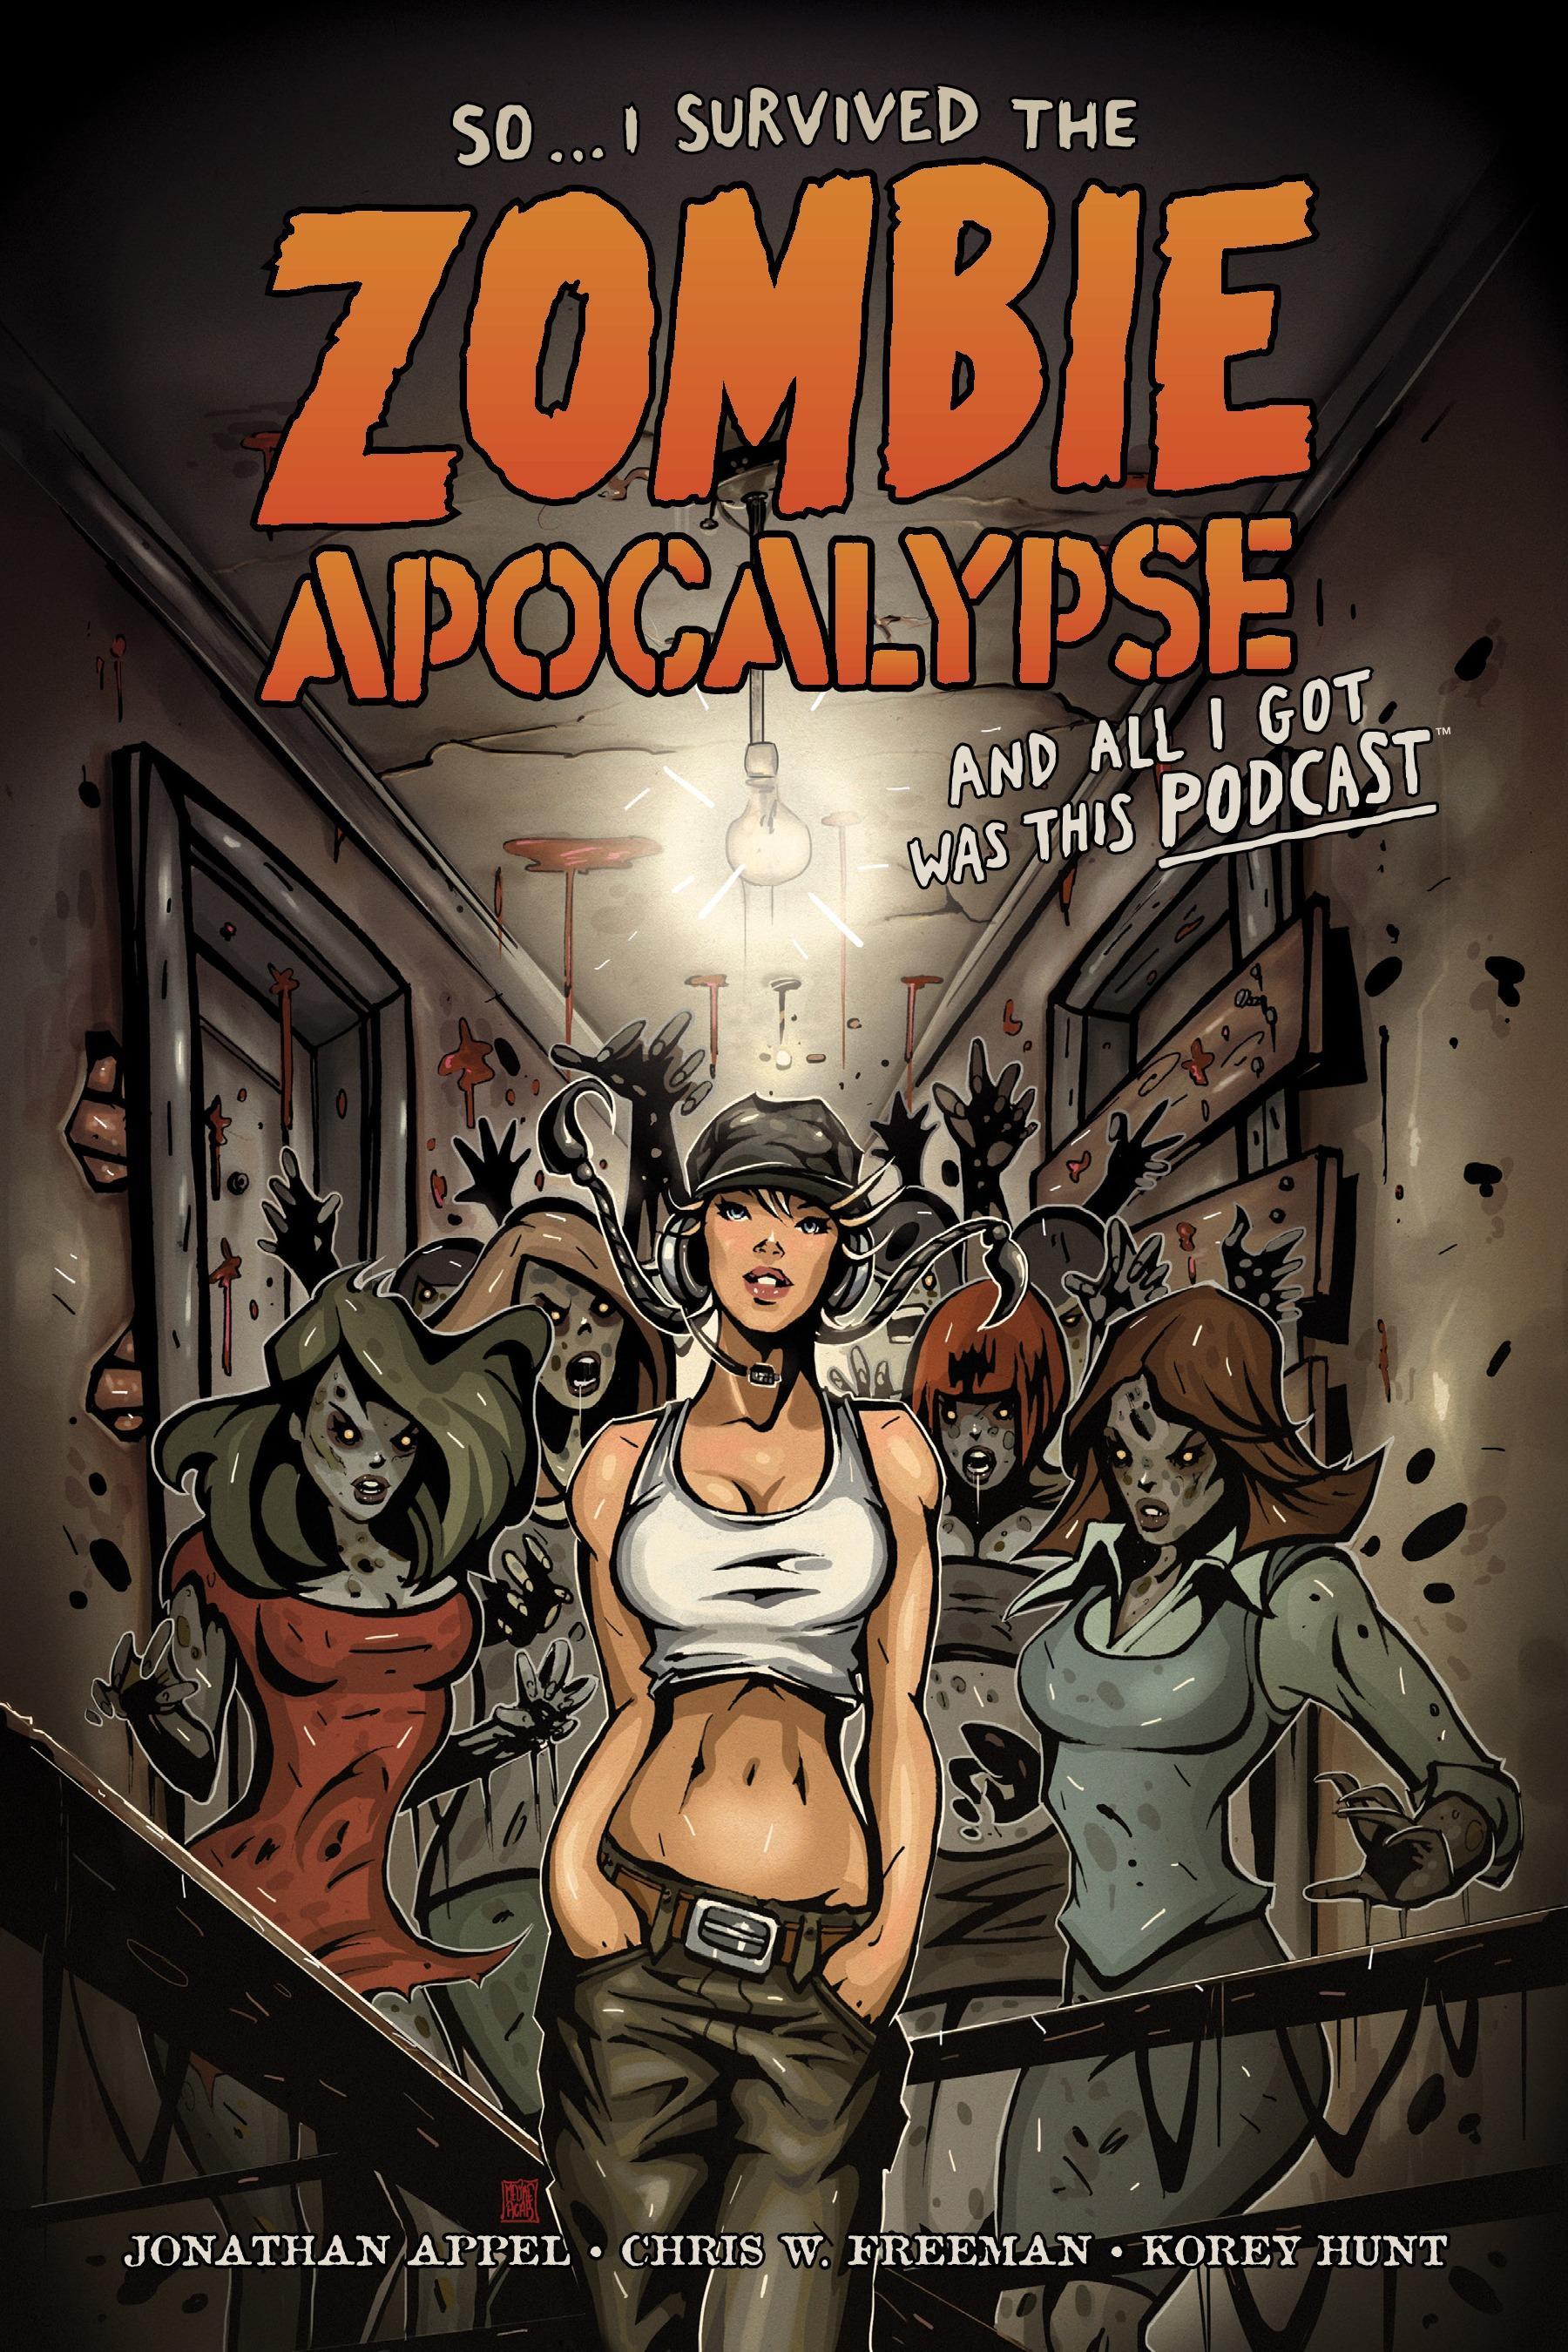 So...i Survived The Zombie Apocalypse And All I Got Was This Podcast